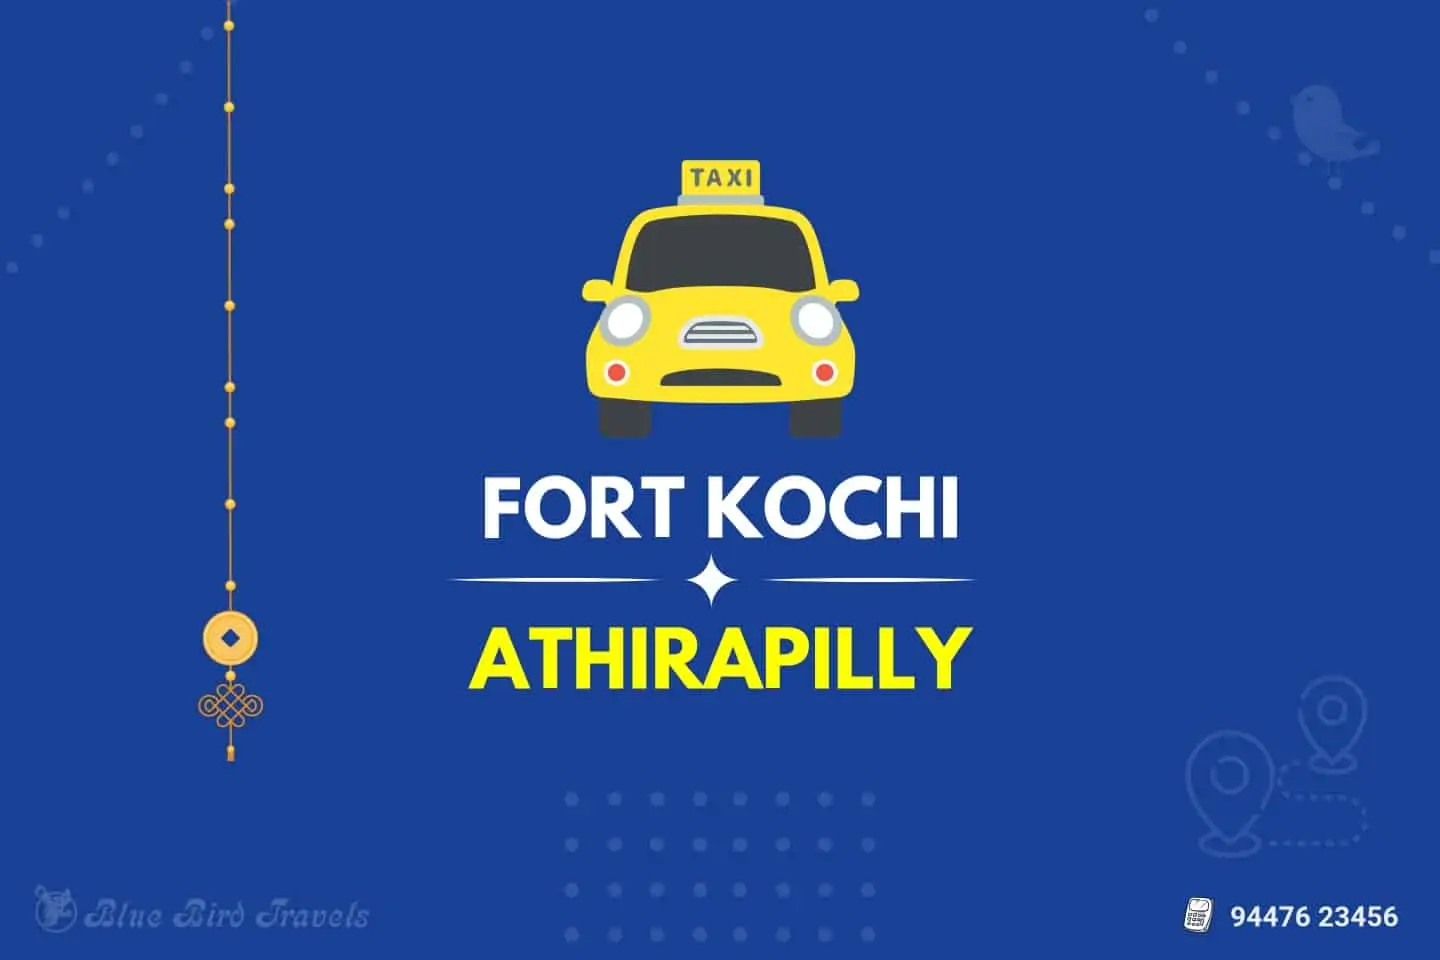 Fort Kochi to Athirapilly Taxi (Featured Image)